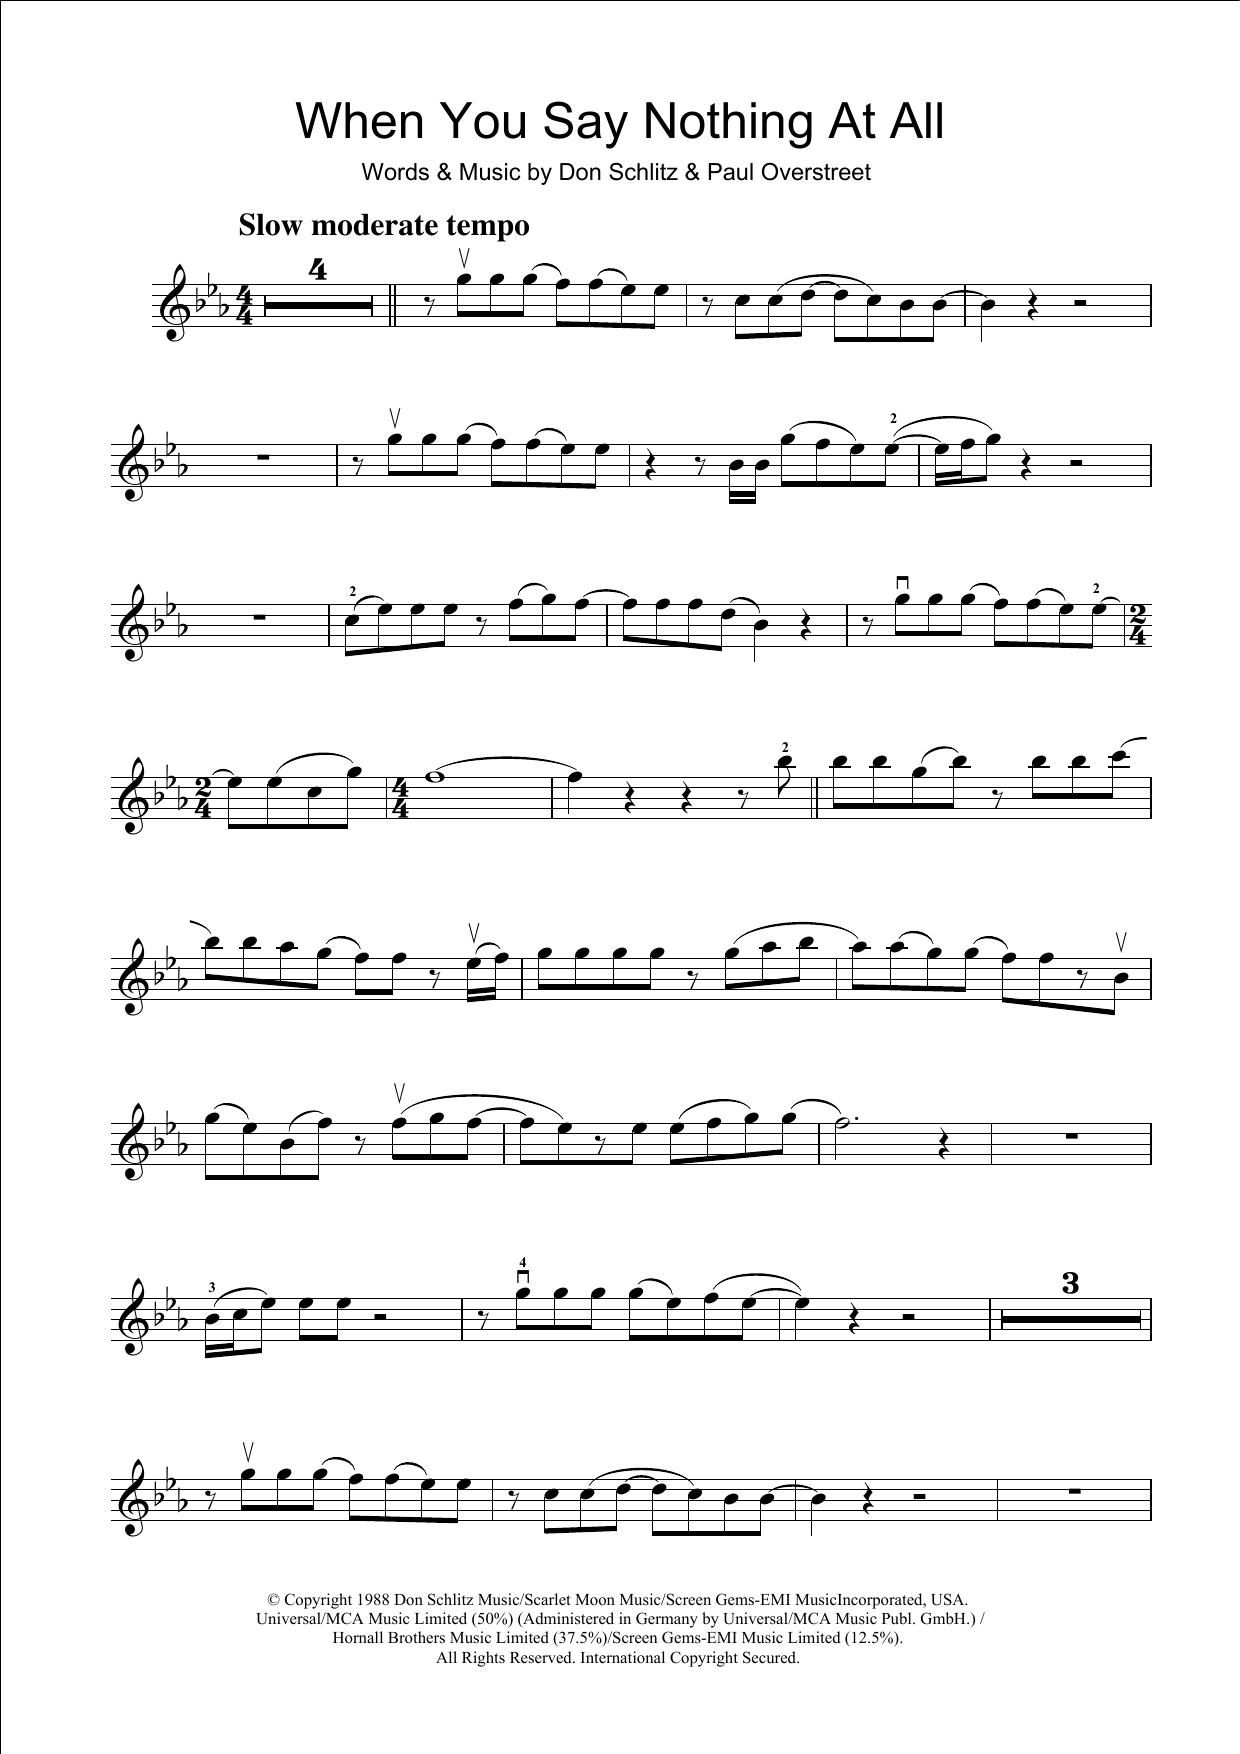 Download Alison Krauss When You Say Nothing At All Sheet Music